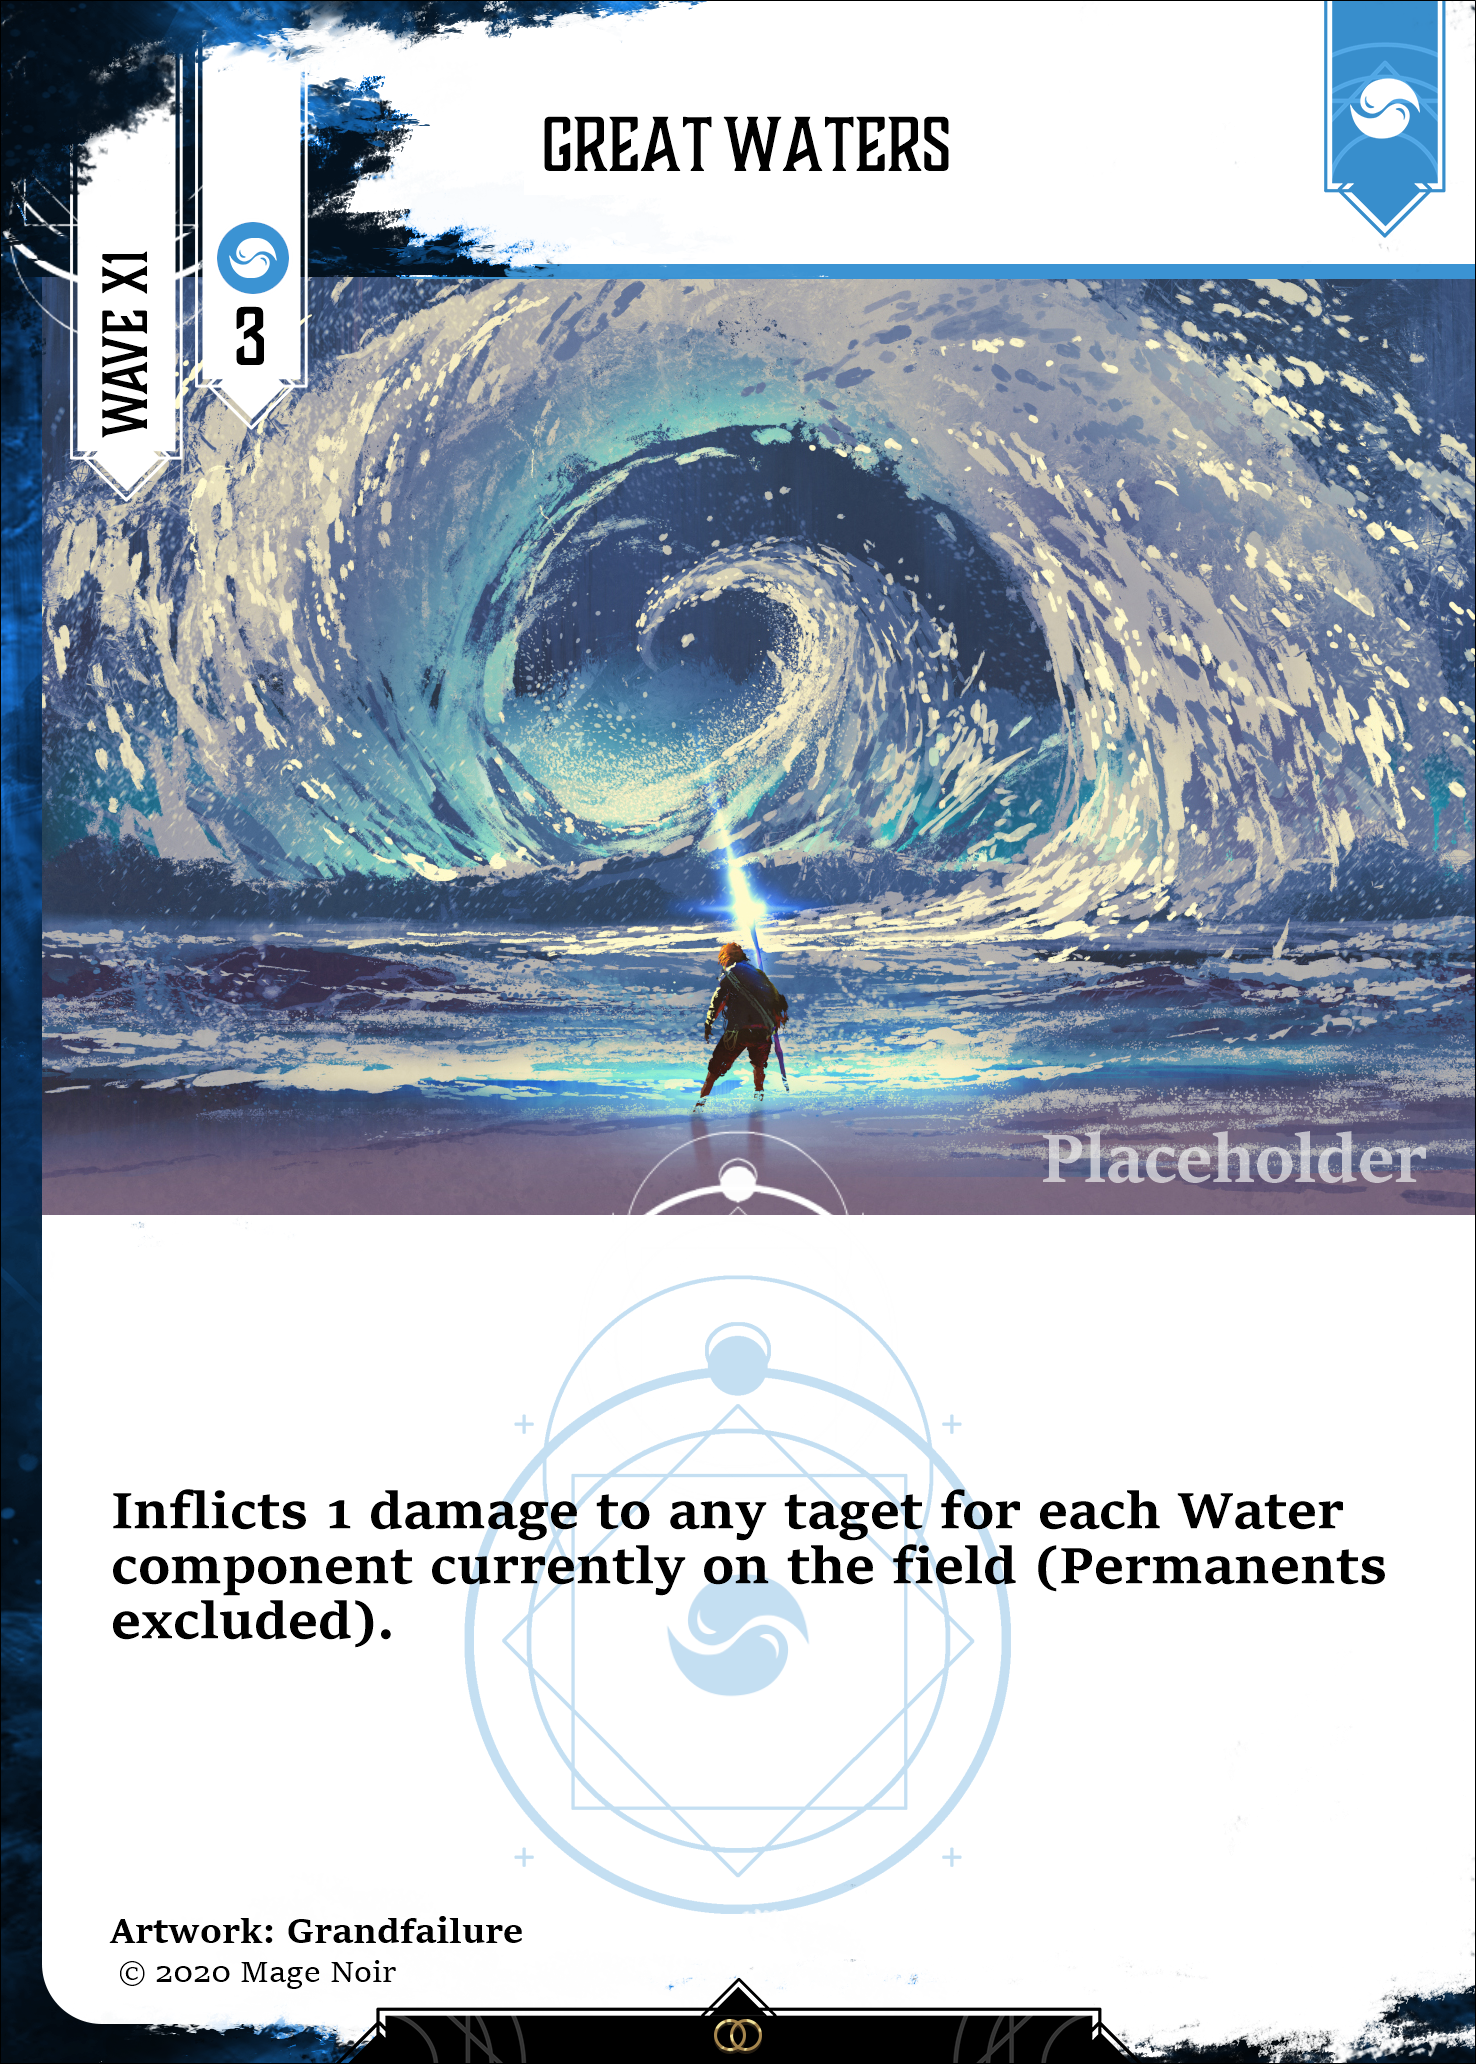 Great waters card